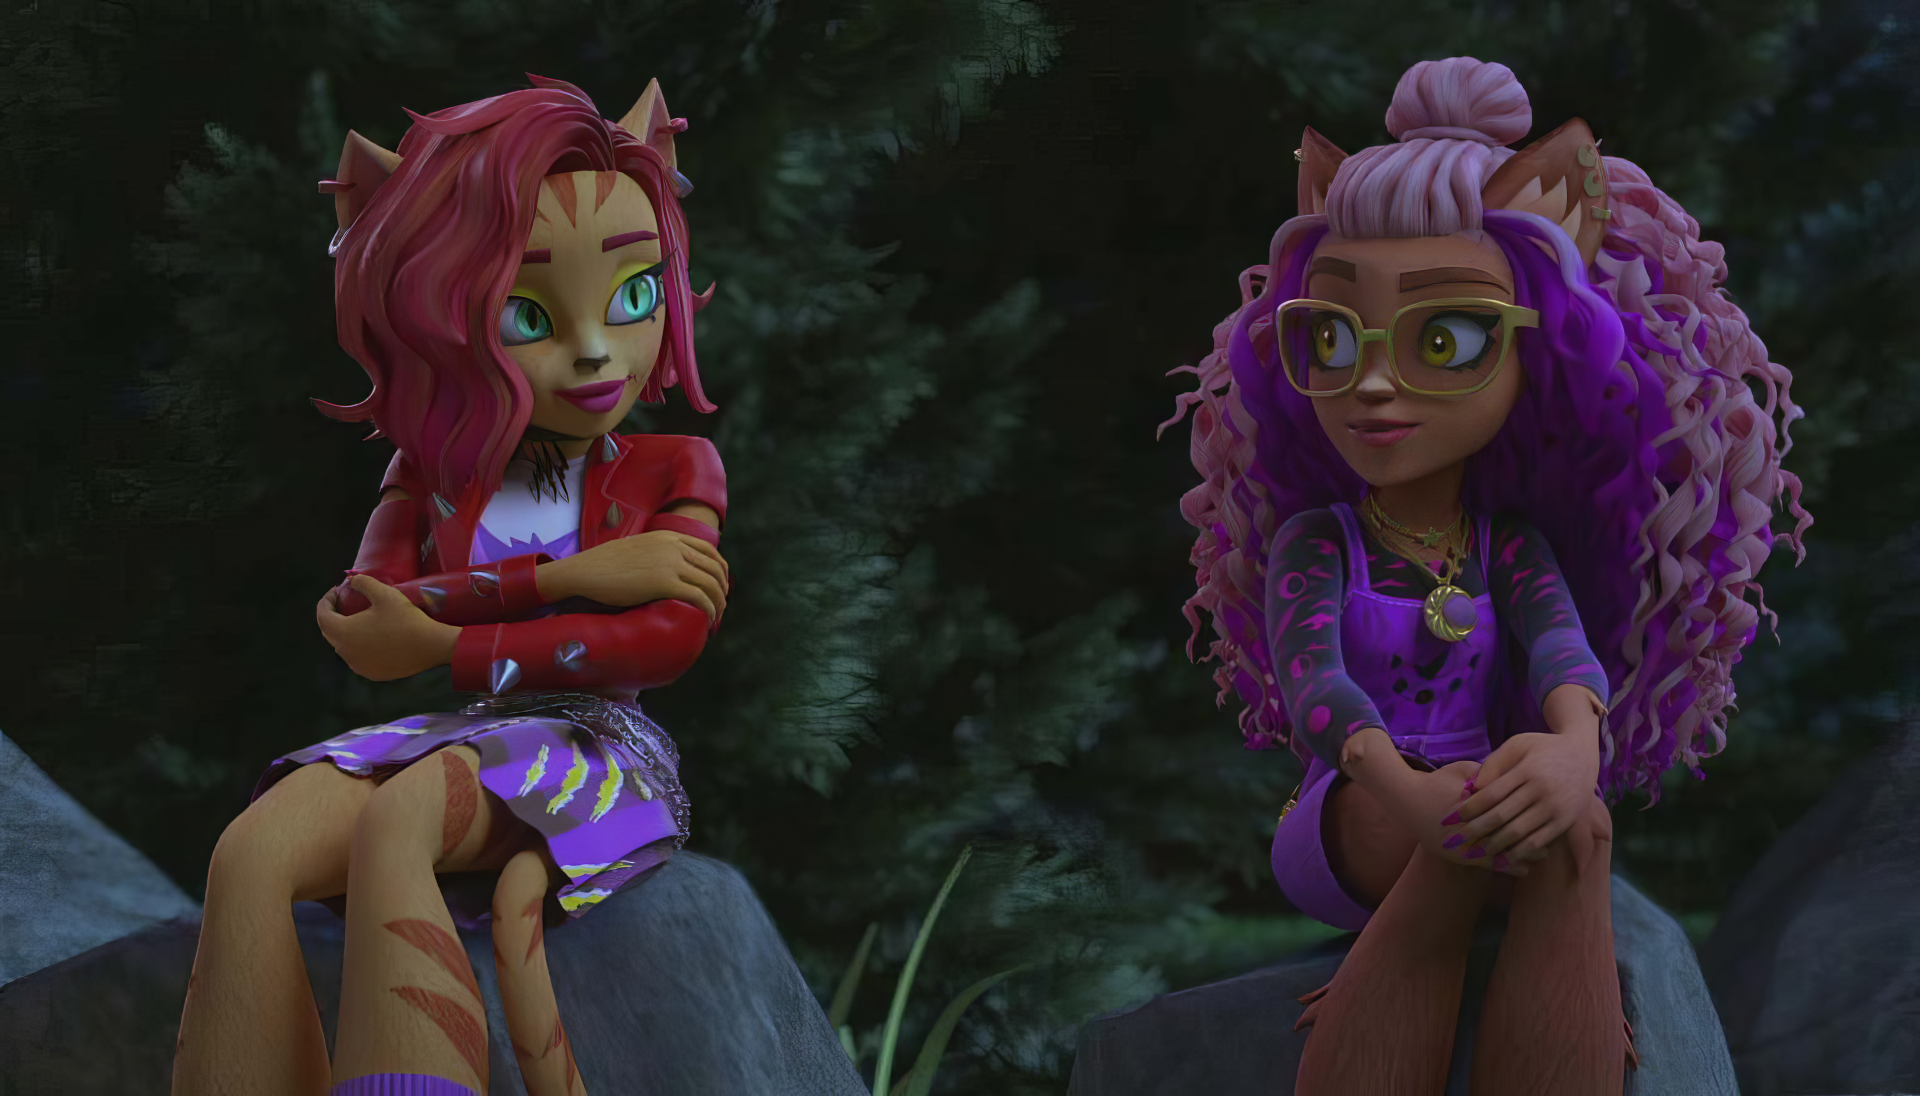 Two animated characters from the Monster High TV show sitting on a rock, one with striking red hair and horns, the other with curly purple hair and glasses, in a dark, wooded setting.